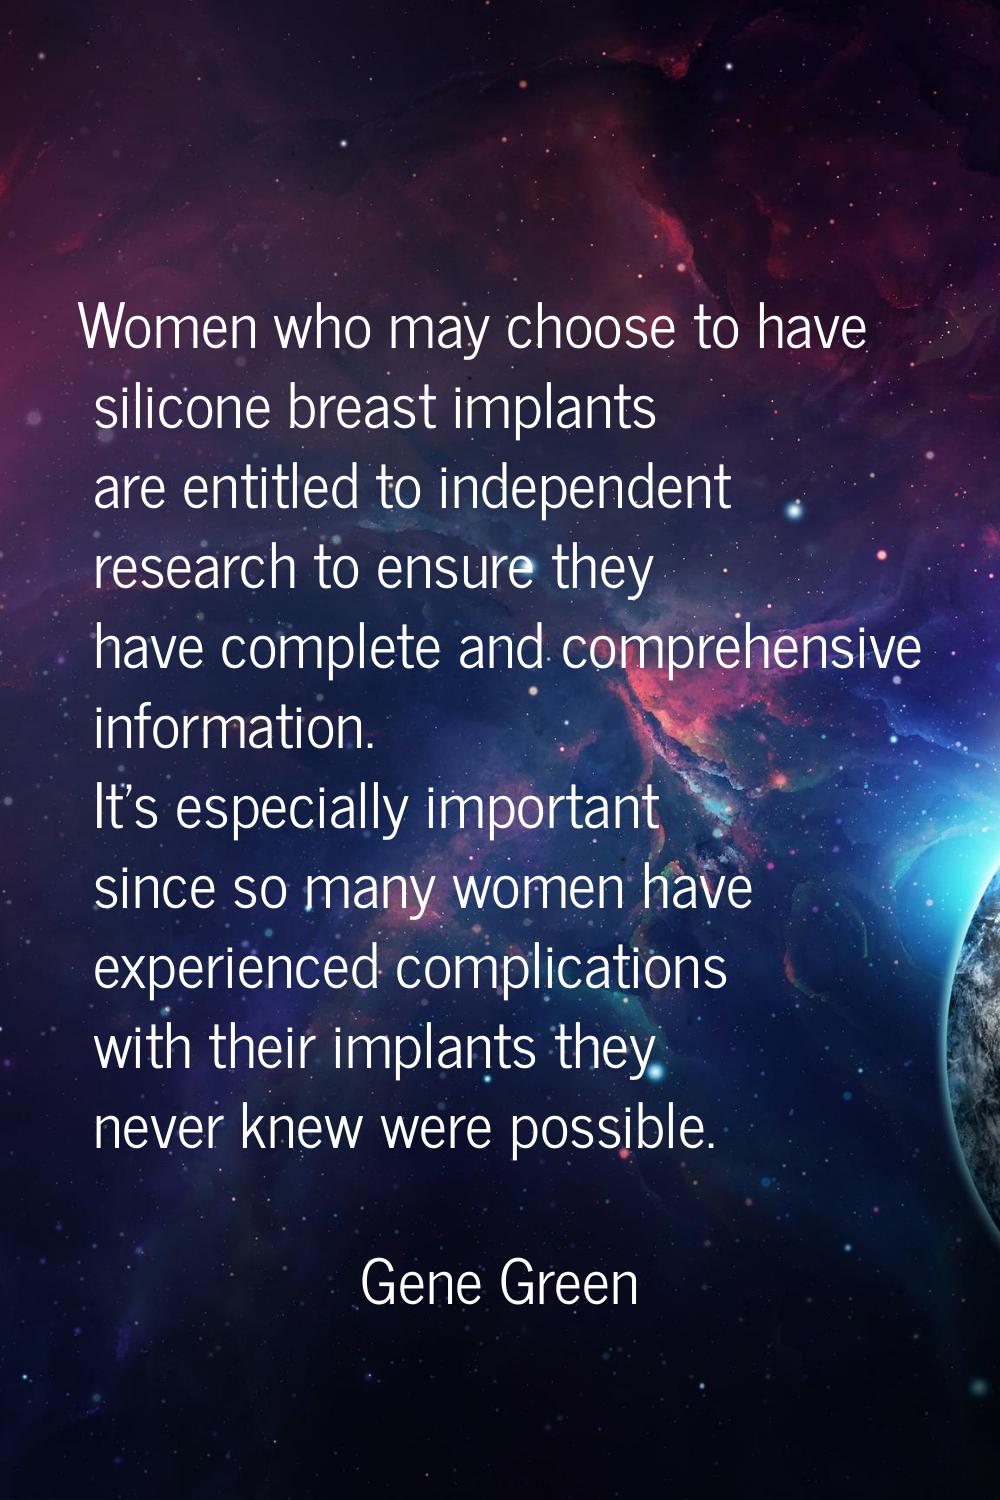 Women who may choose to have silicone breast implants are entitled to independent research to ensur